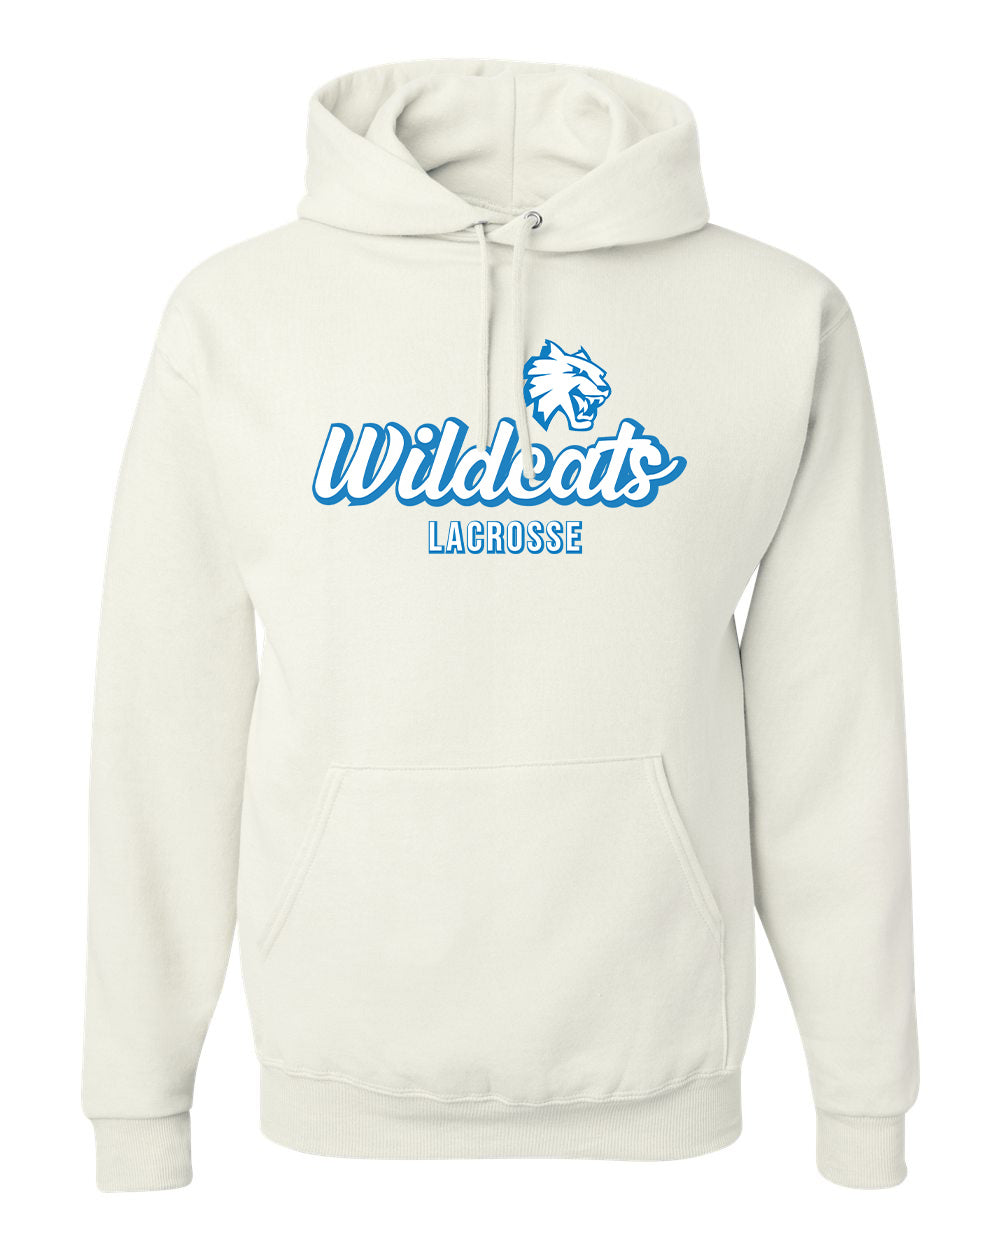 Suffield Youth Lacrosse - Adult Hoodie "Cursive" - 996MR (color options available)